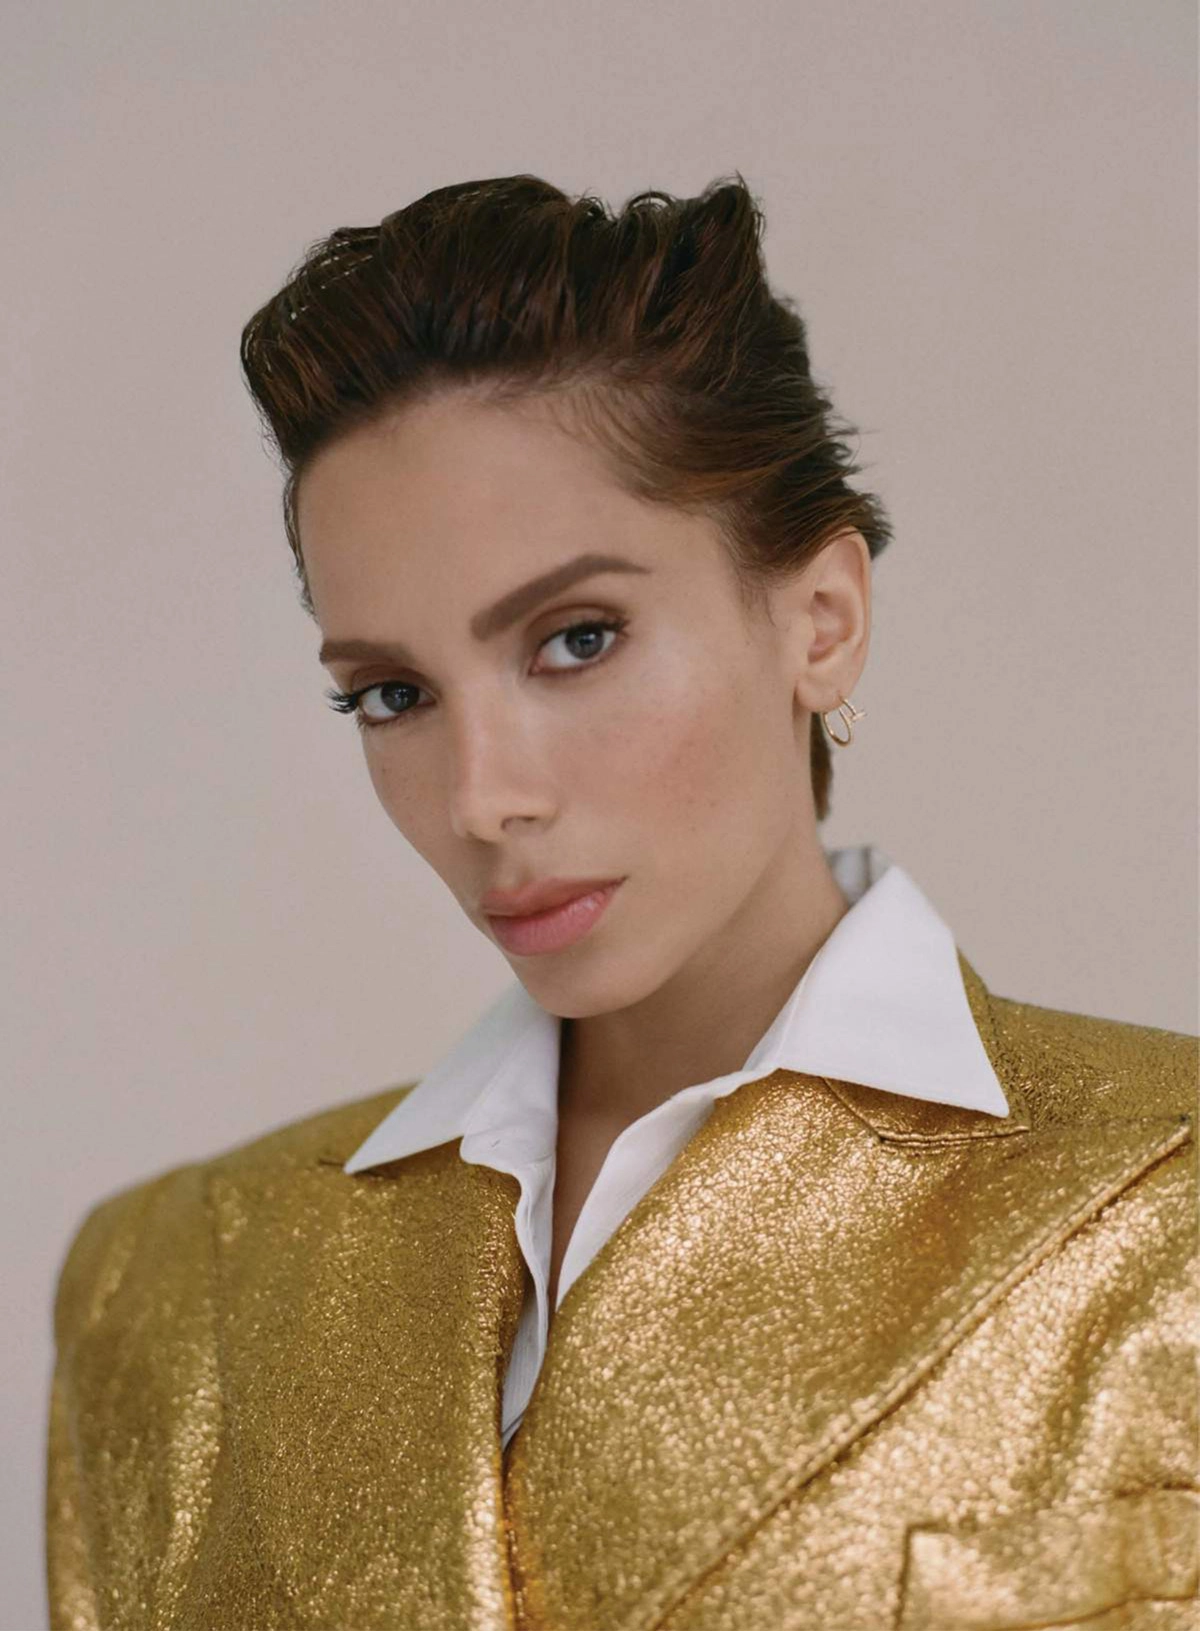 Anitta covers Vogue Mexico & Latin America September 2022 by Rafael Martínez